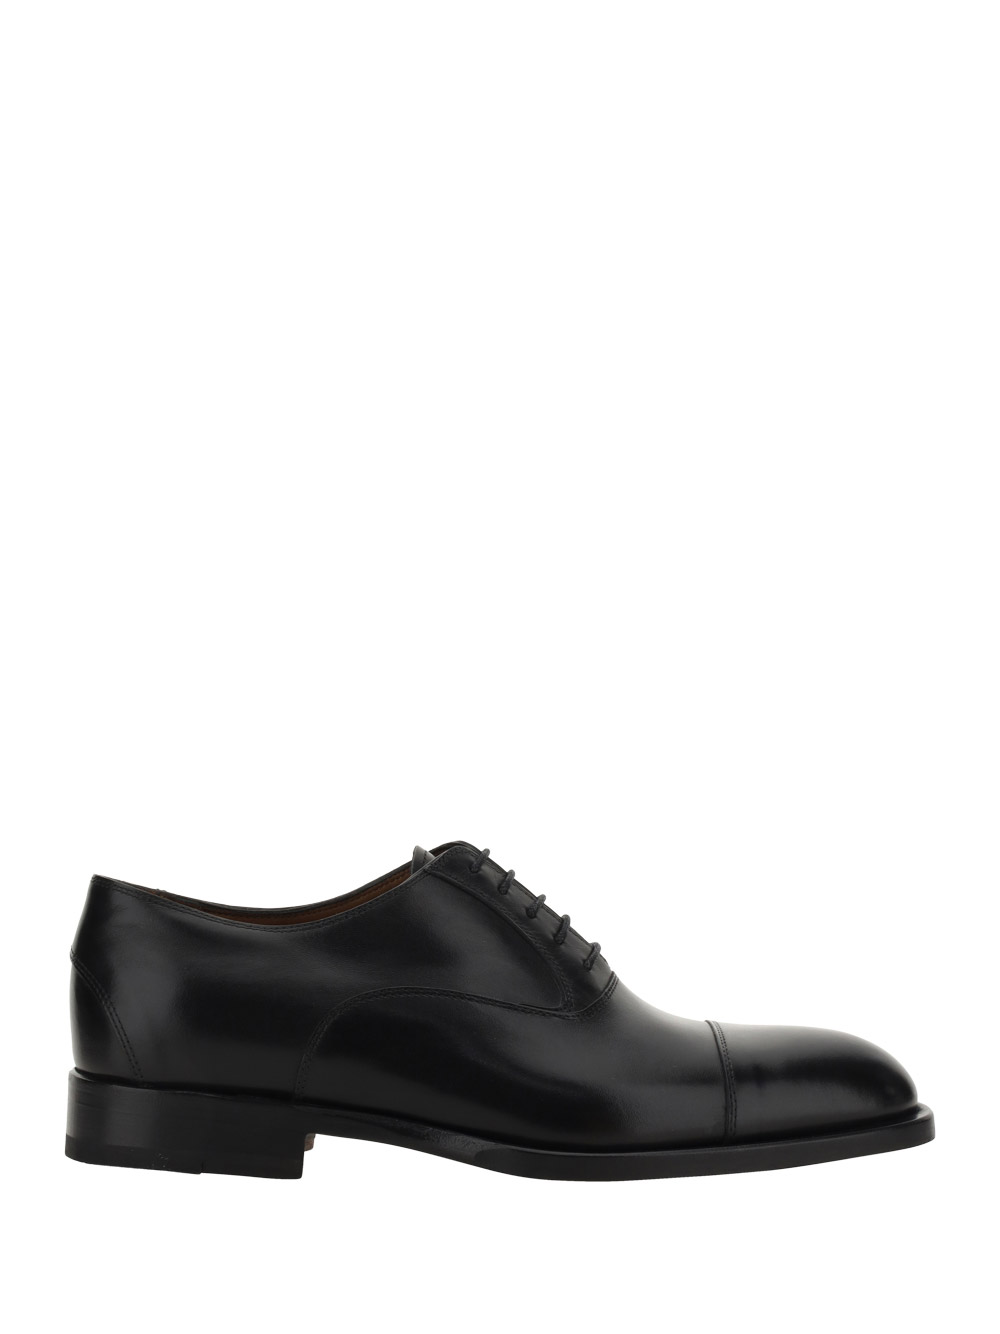 Fratelli Rossetti - Lace Up Shoes